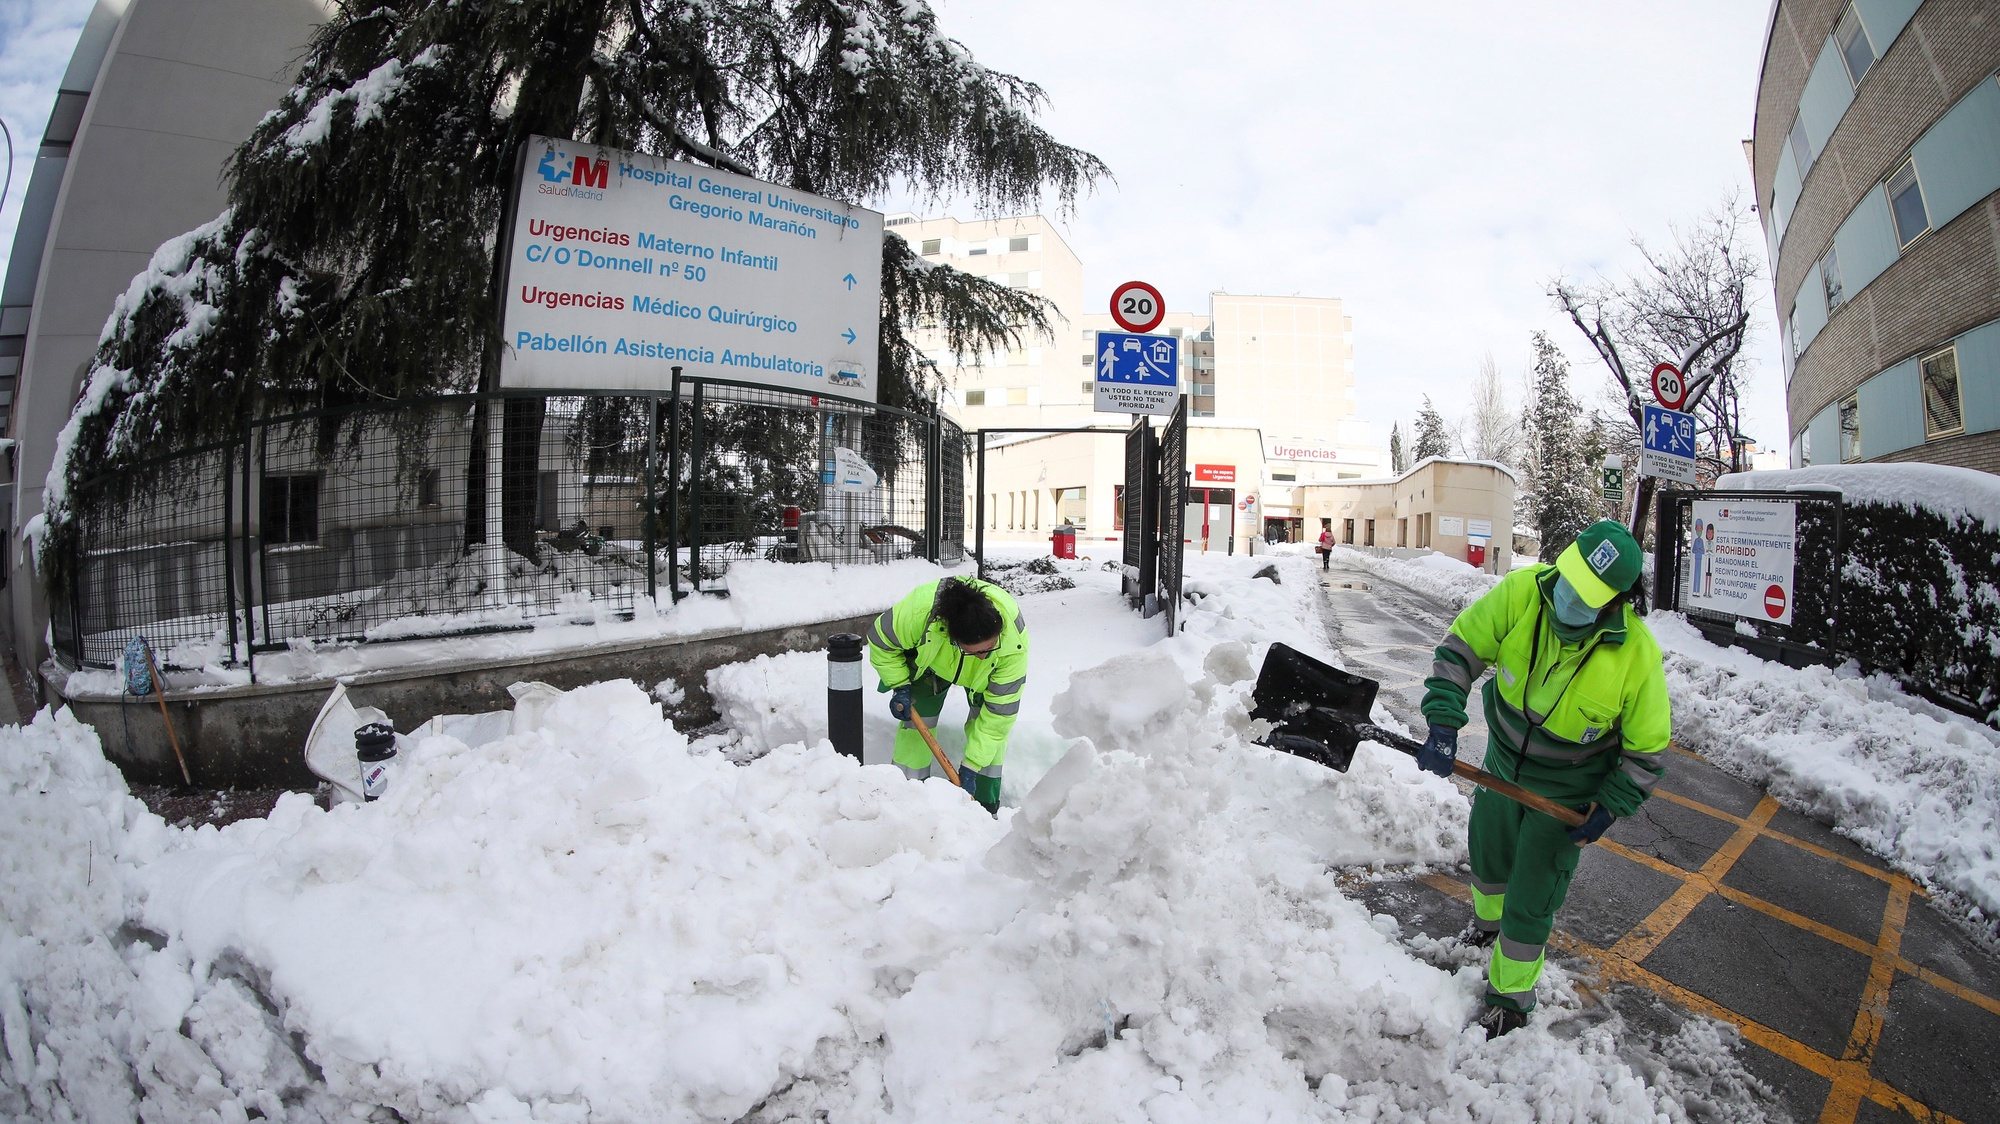 epa08930089 Municipal workers clear the snow in the surroundings of Gregorio Maranon Hospital in the aftermath of Storm Filomena in Madrid, Spain, 10 January 2021.  EPA/David Fernandez